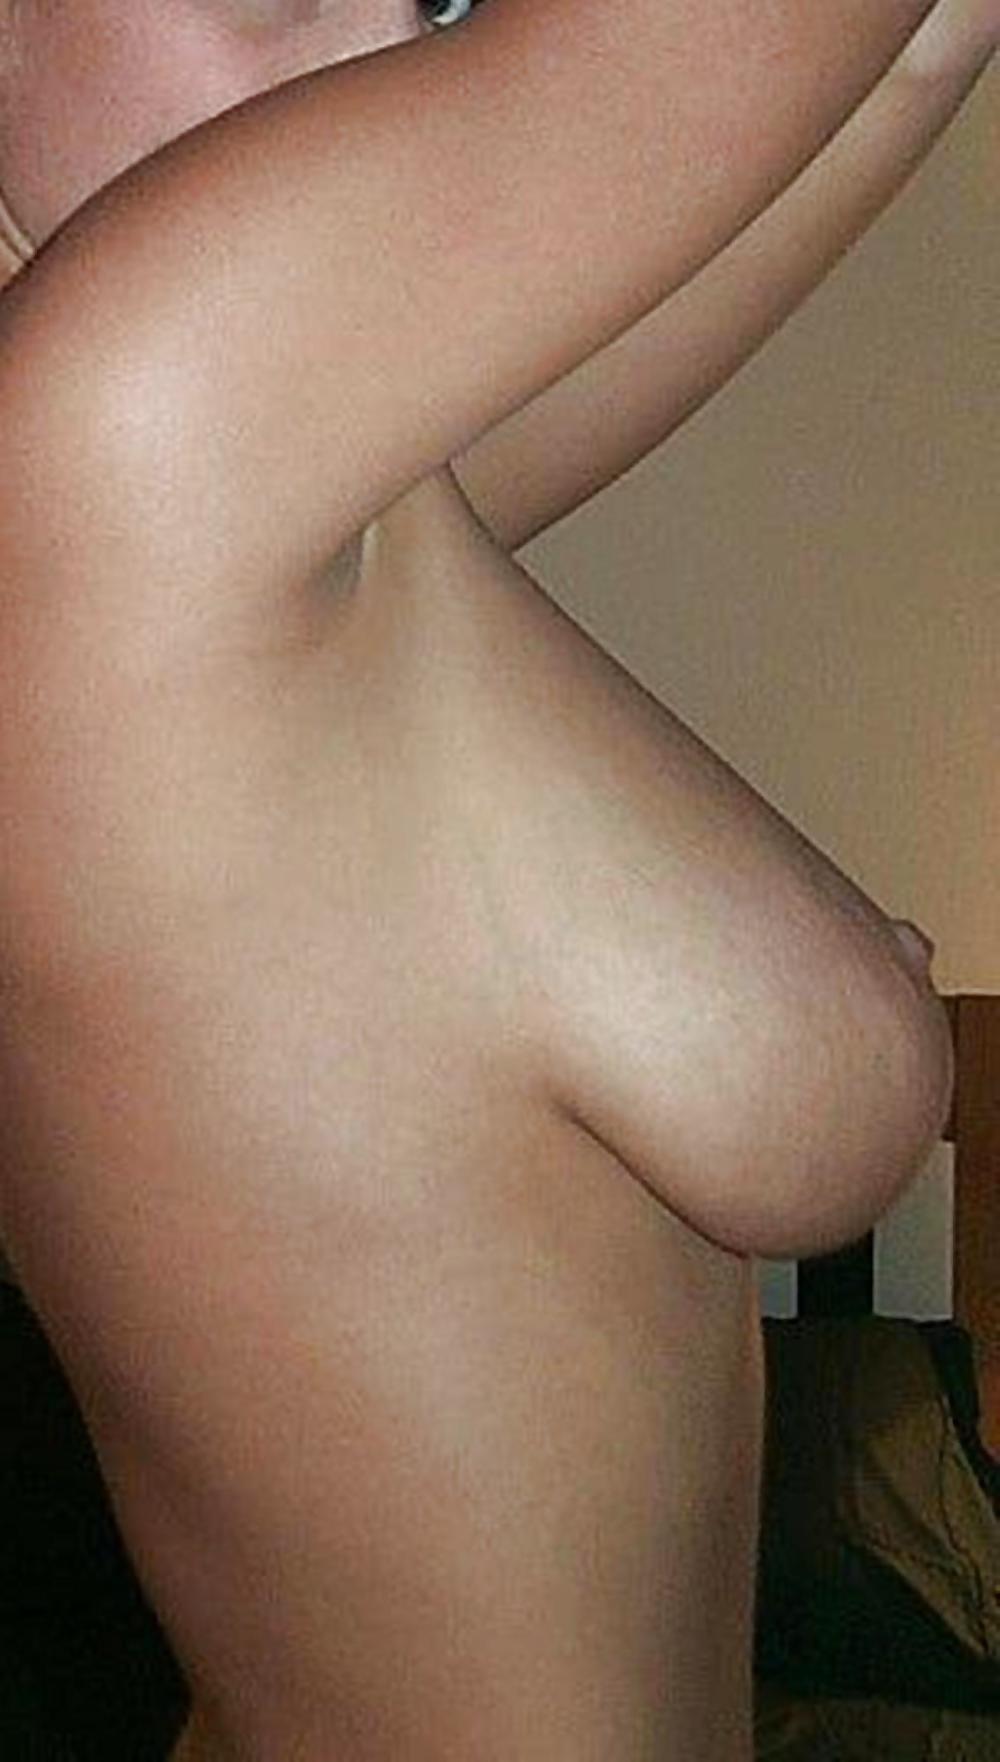 Sex Tits Nipples Ass Pussy all real amateurs Pics image